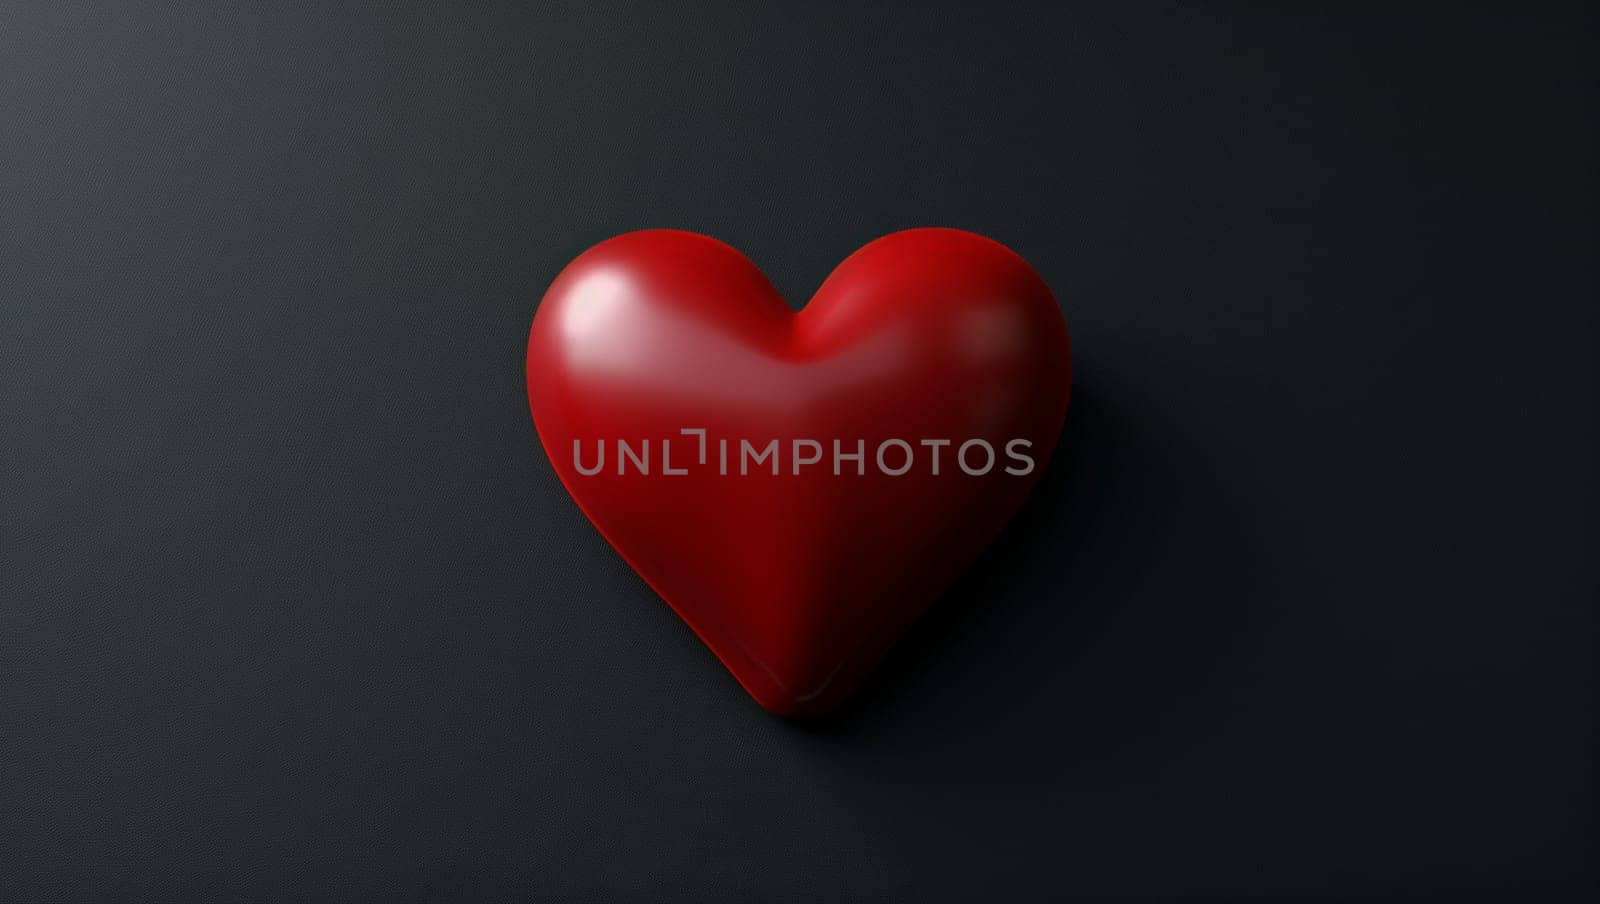 Red heart on a black background. Stylish image. High quality photo